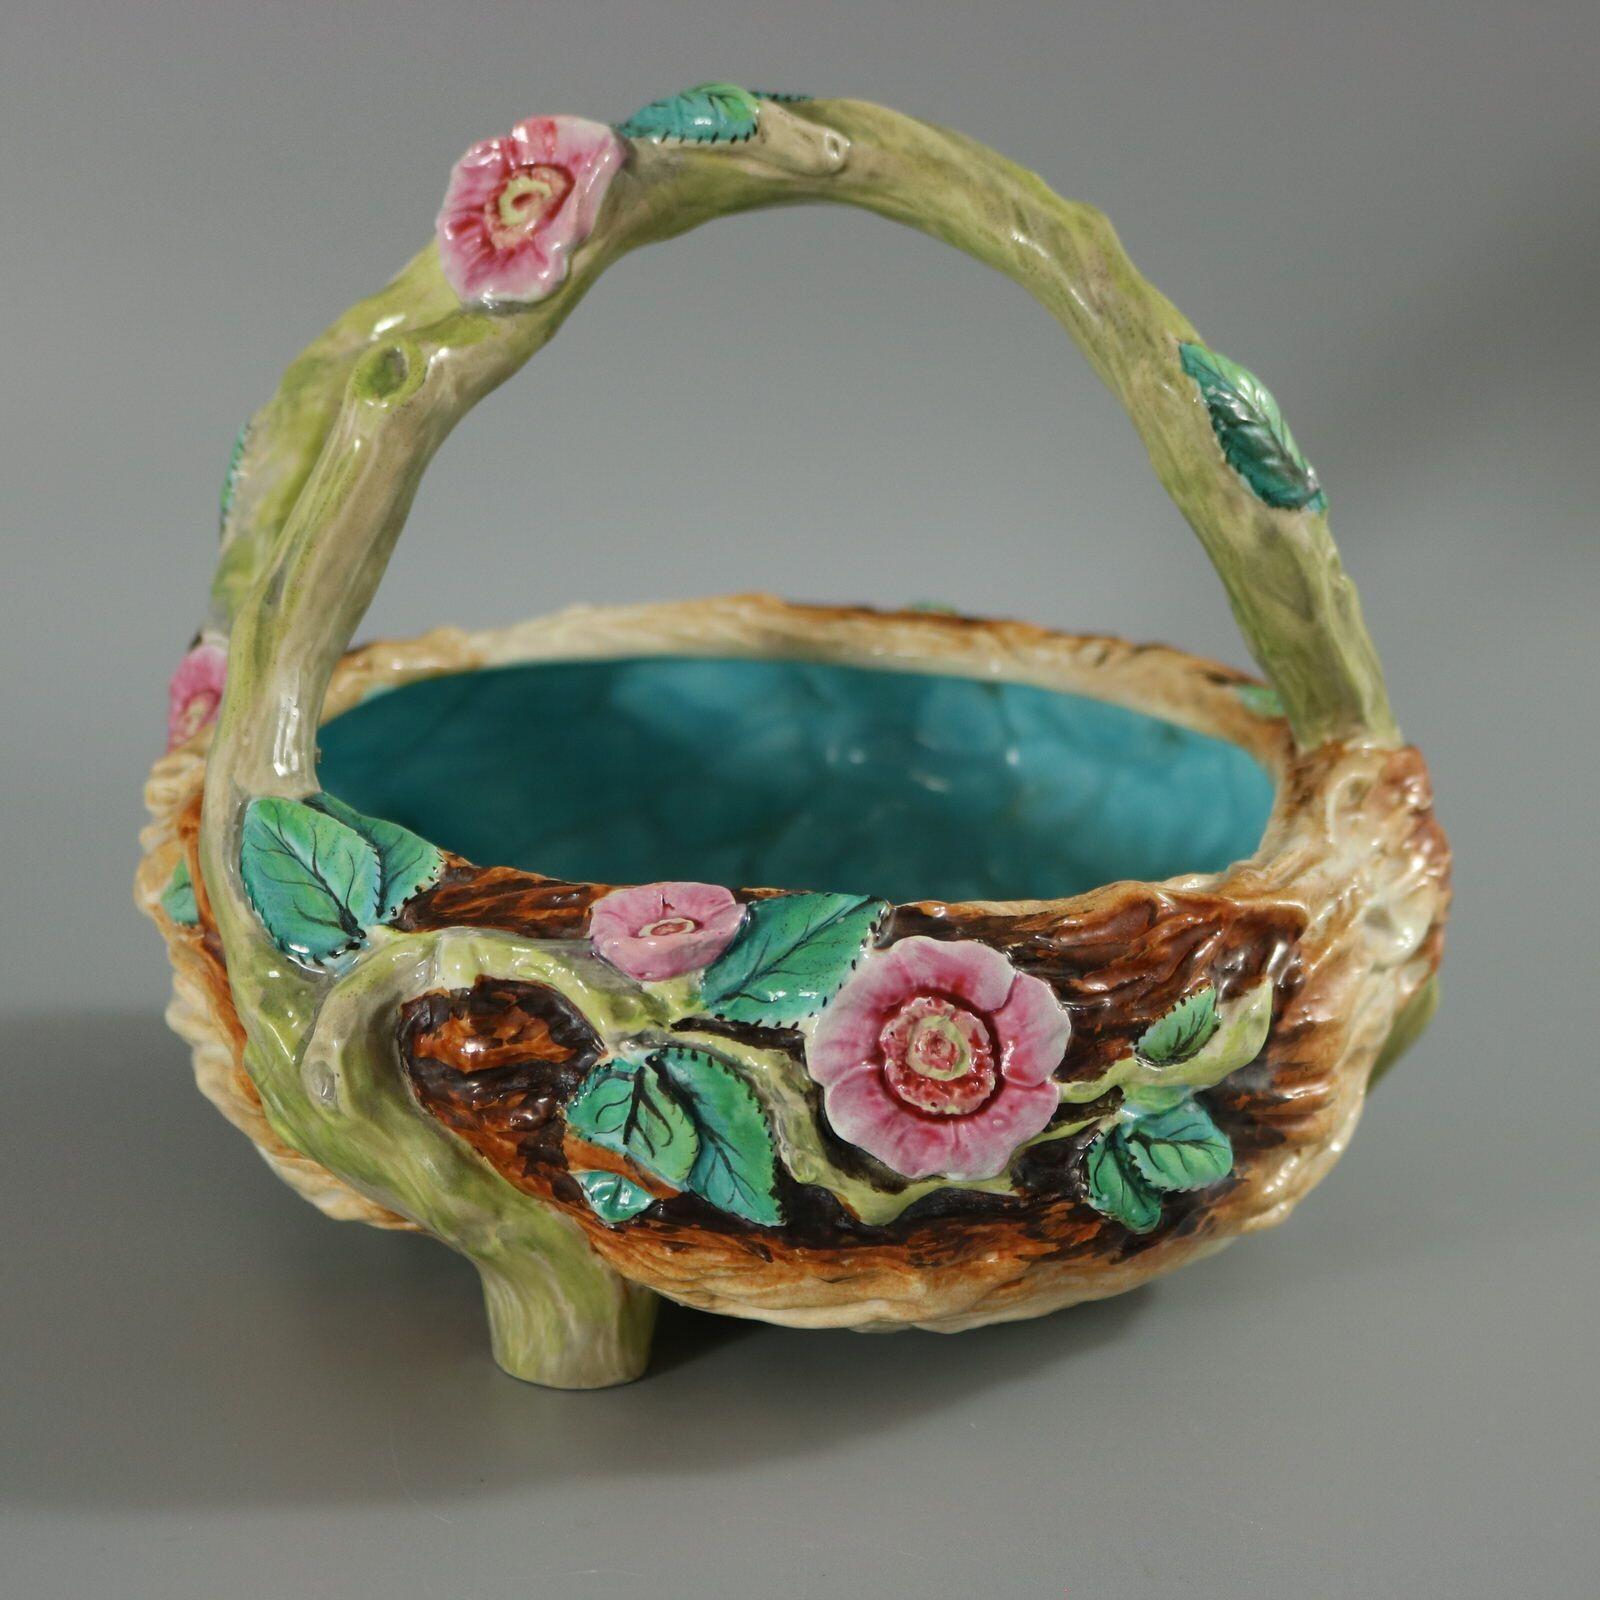 Royal Worcester Majolica basket which features pink flowers and green leaves, which are hand painted and overglazed. Green branch molded handle and three feet. Colouration: green, pink, brown, are predominant. The piece bears maker's marks for the